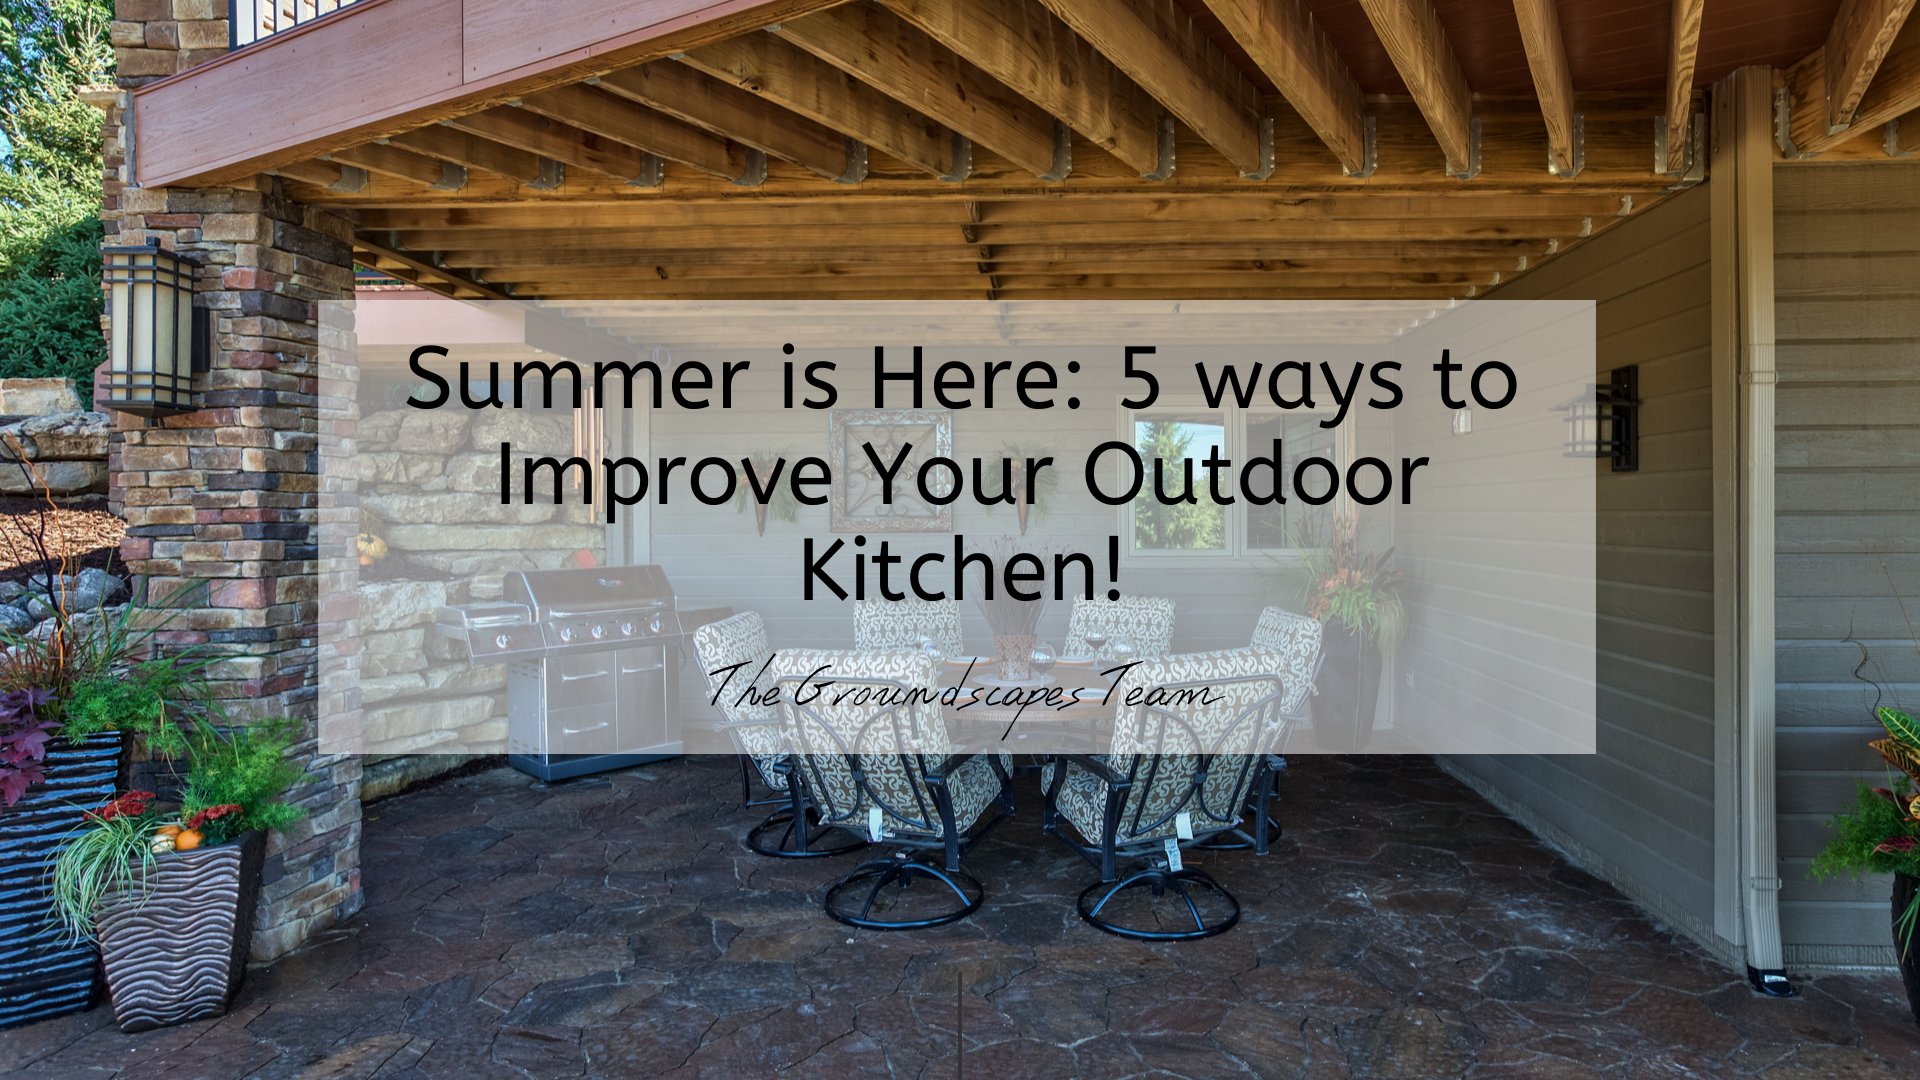 Summer is Here: 5 ways to Improve Your Outdoor Kitchen!